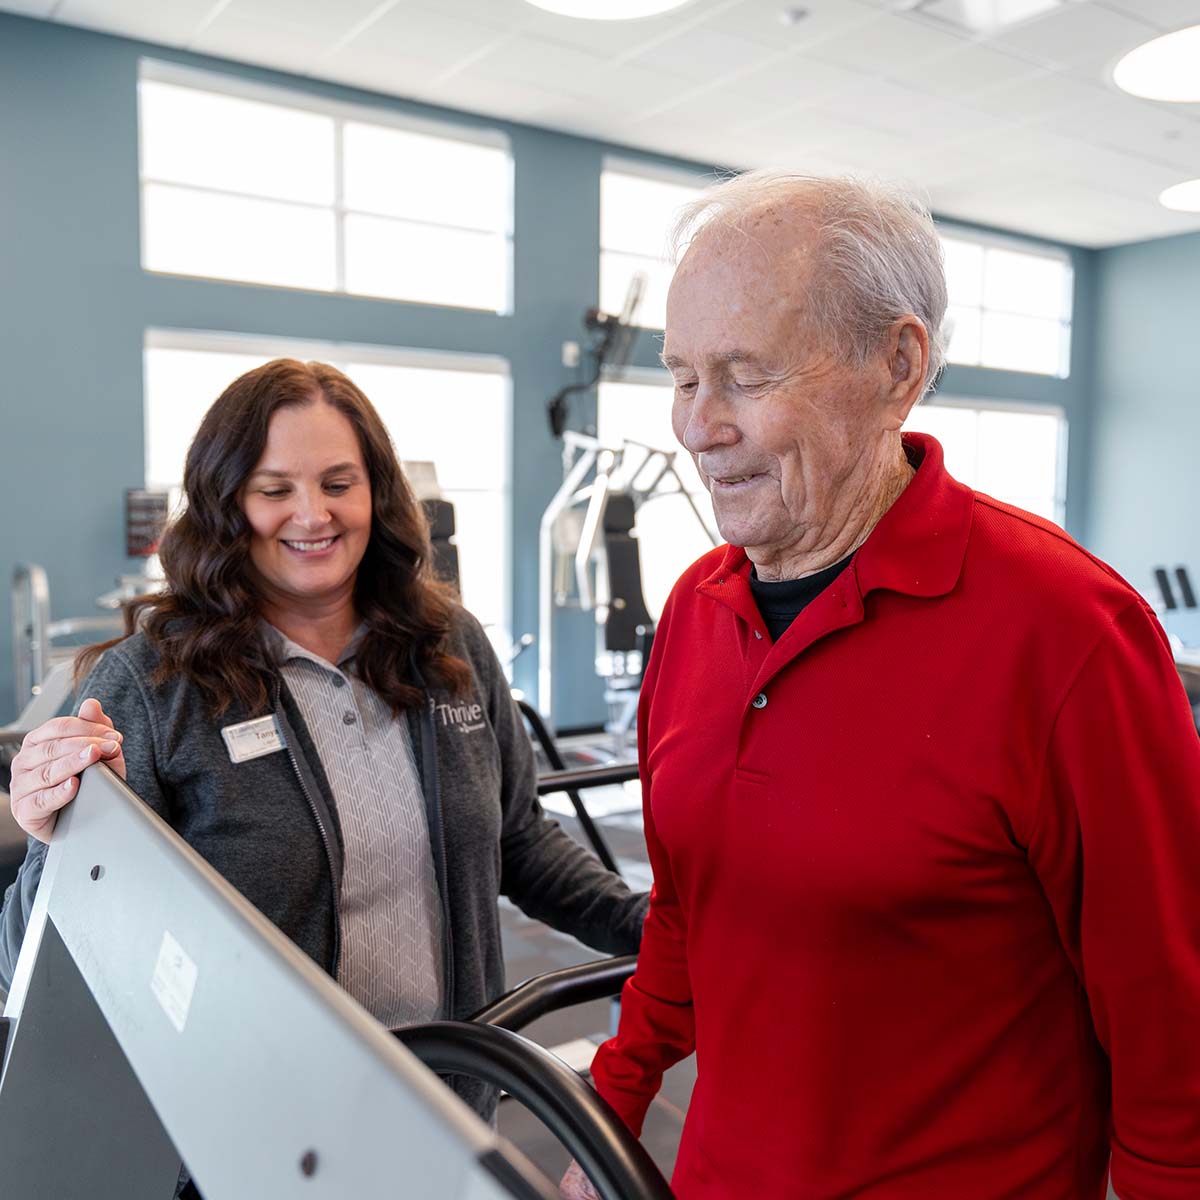 A Thrive instructor works with a resident as they are walking on a treadmill.